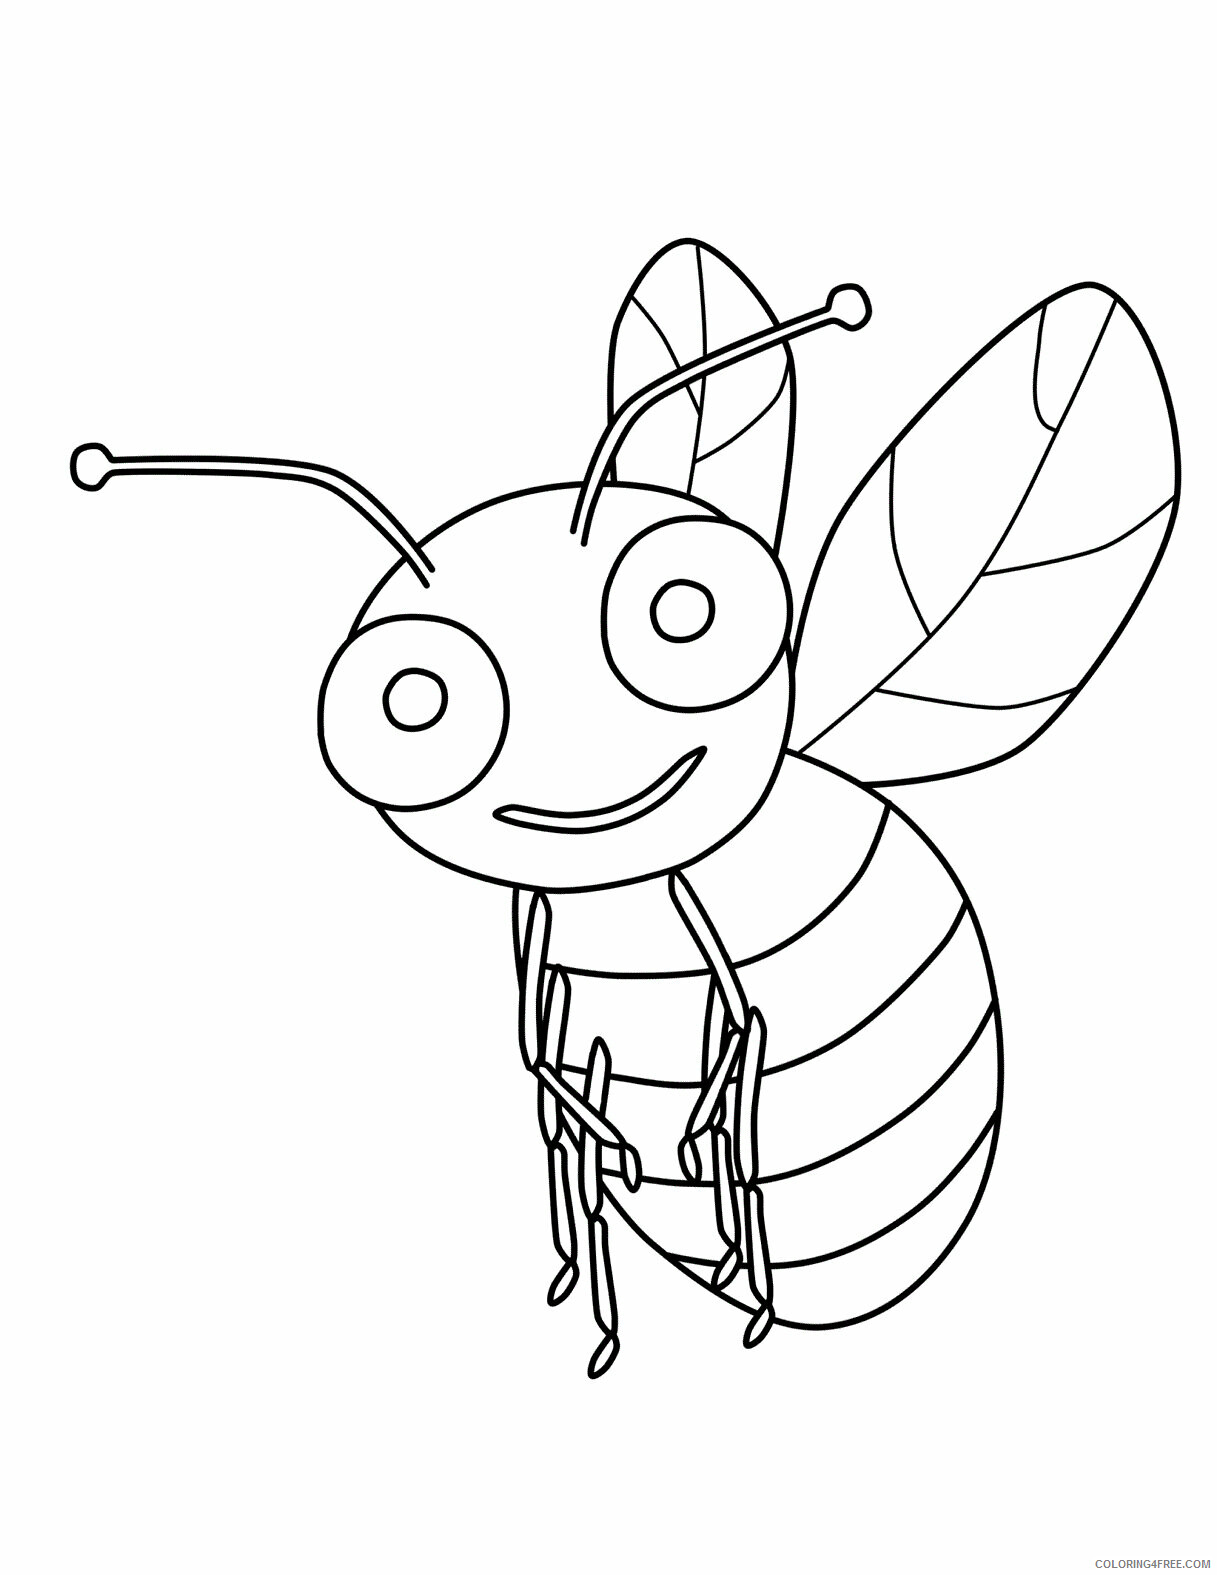 Bee Coloring Pages Animal Printable Sheets Free Bumble Bee 2021 0408 Coloring4free